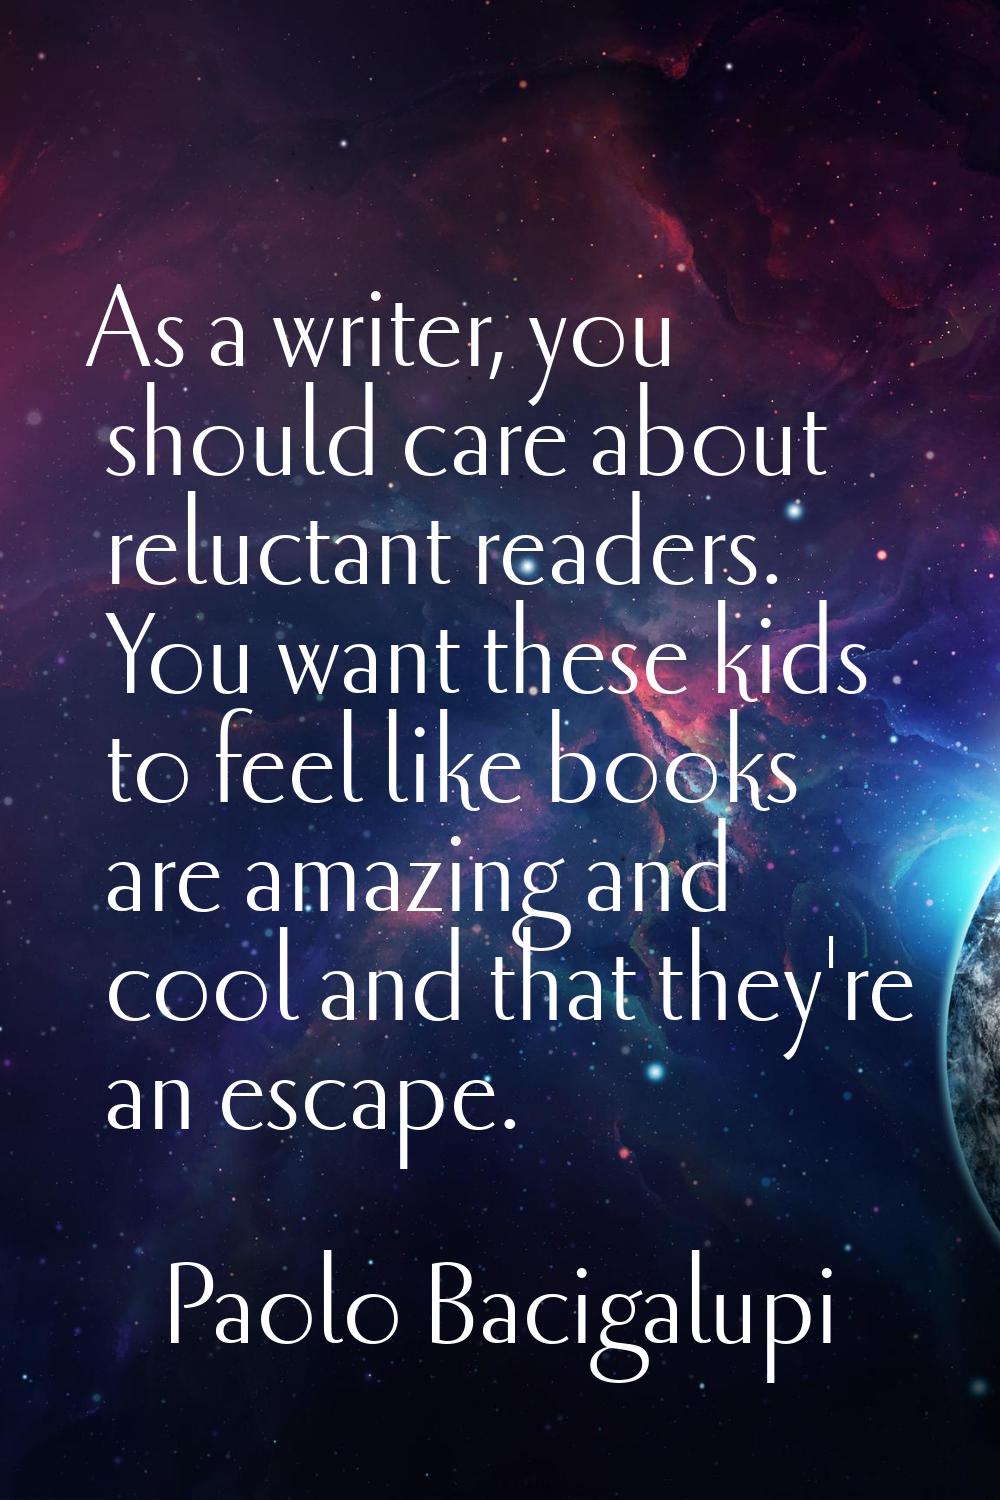 As a writer, you should care about reluctant readers. You want these kids to feel like books are am